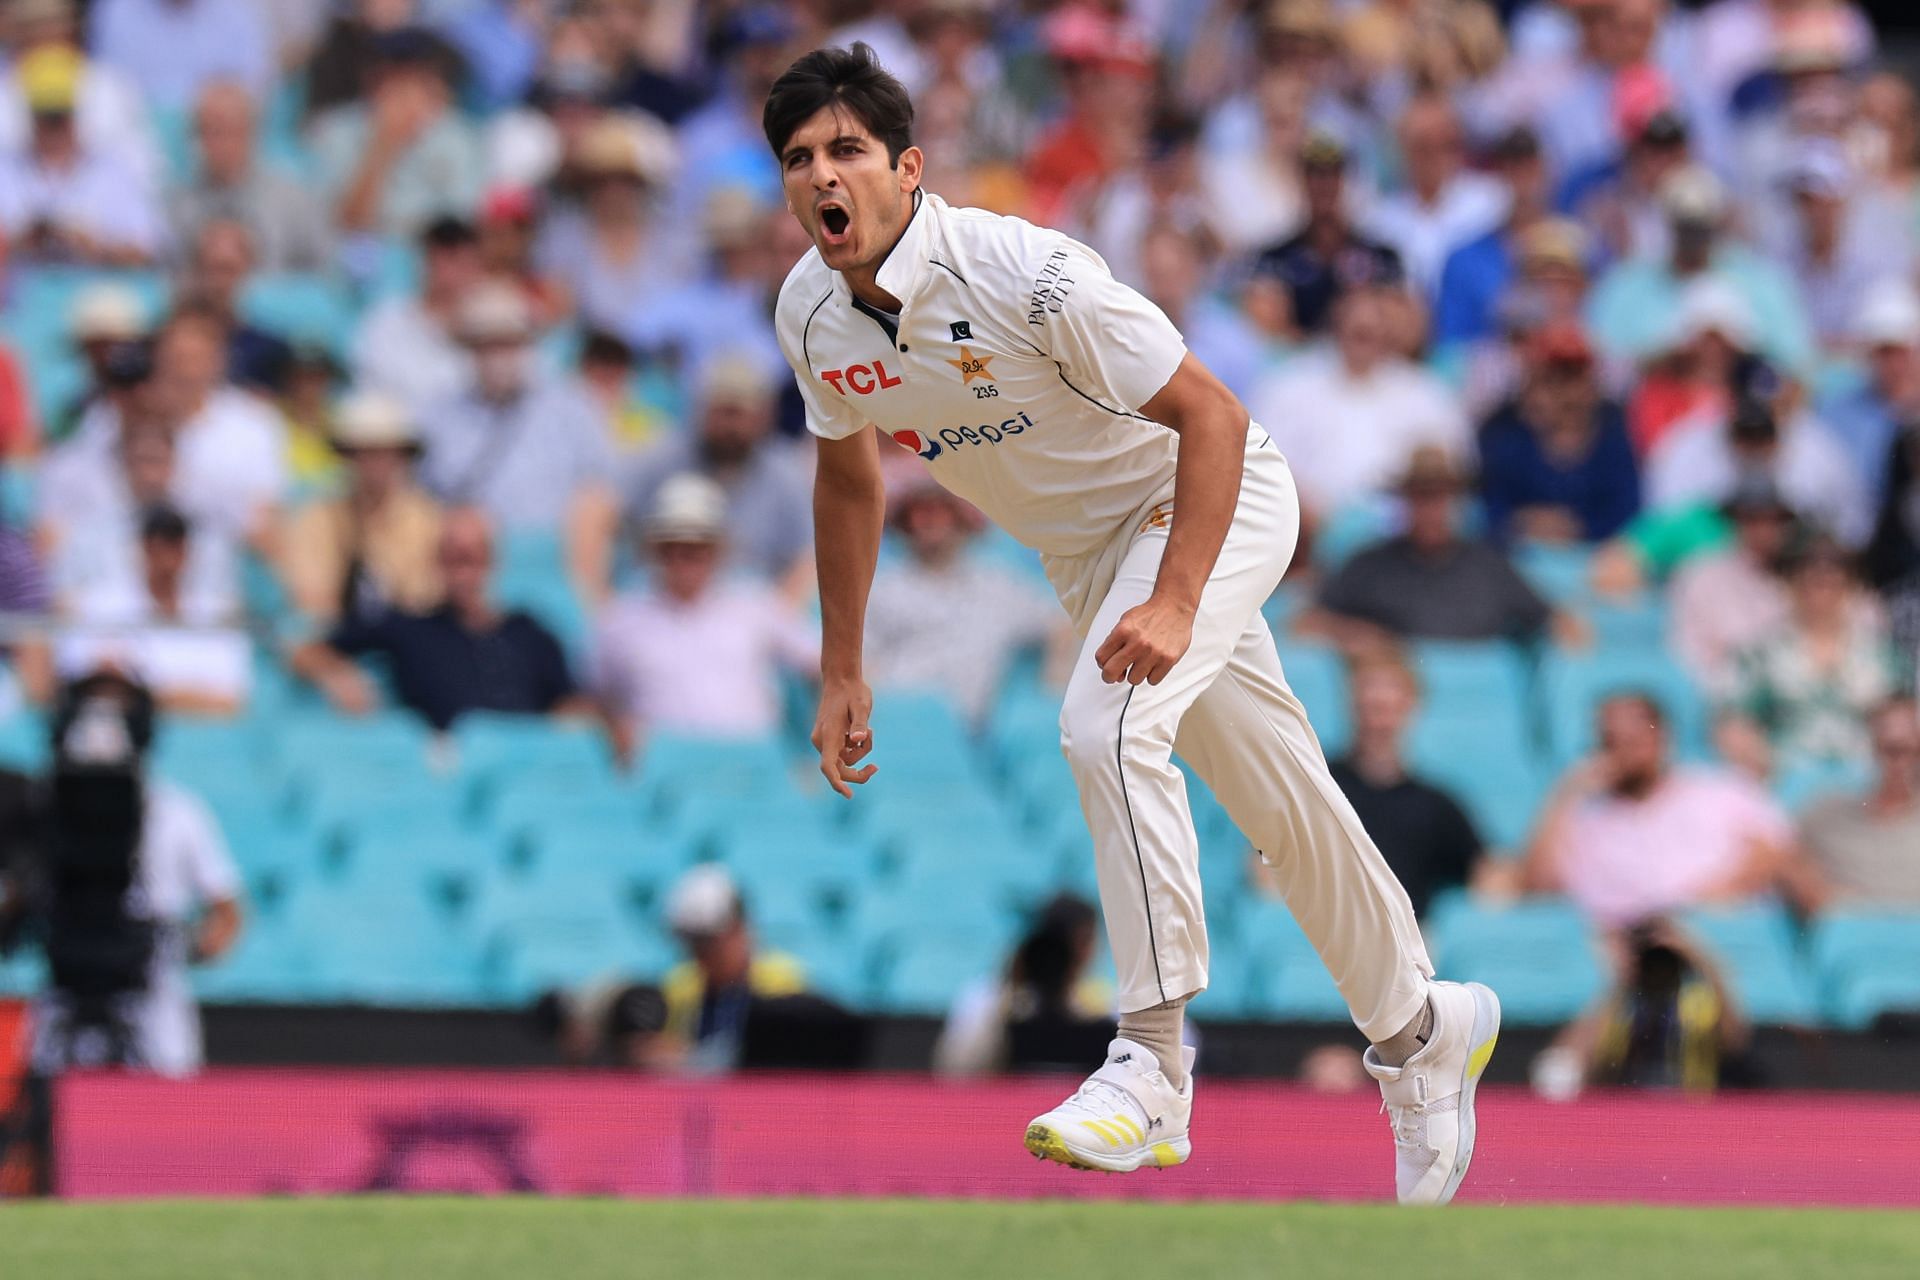 Mir Hamza has been impressive in the two Tests he has played so far. (Pic: Getty)